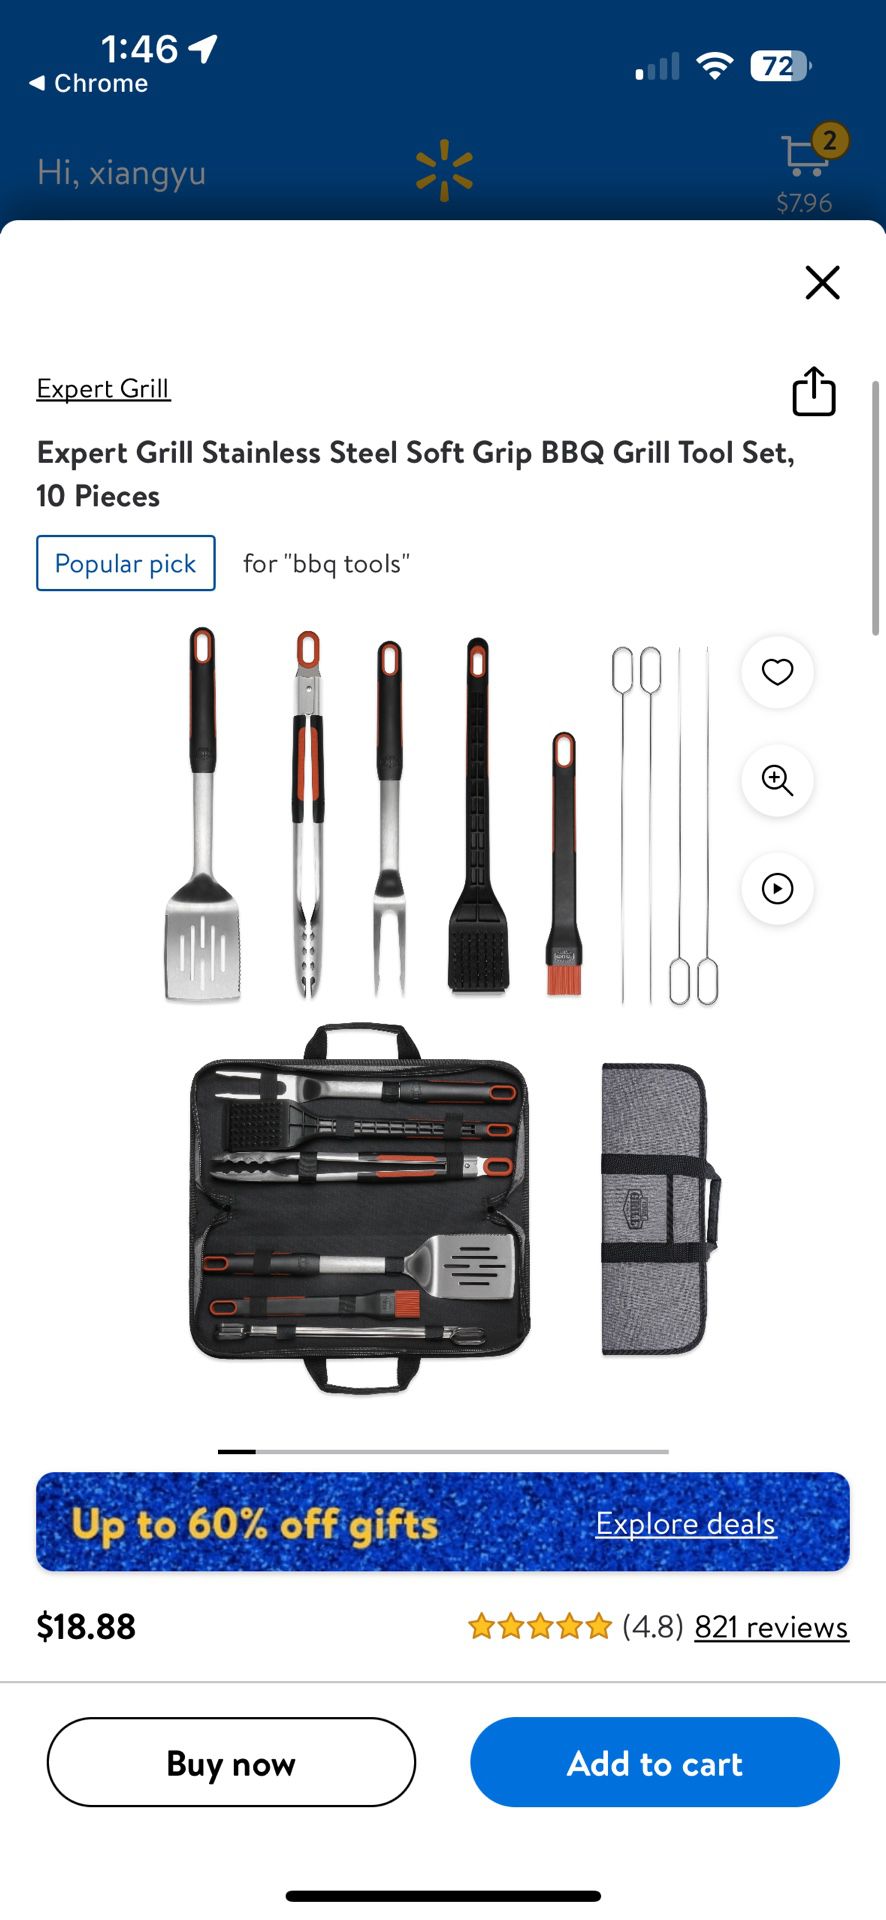 Like New: Expert Grill Stainless Steel Soft Grip BBQ Grill Tool Set, 10 Pieces